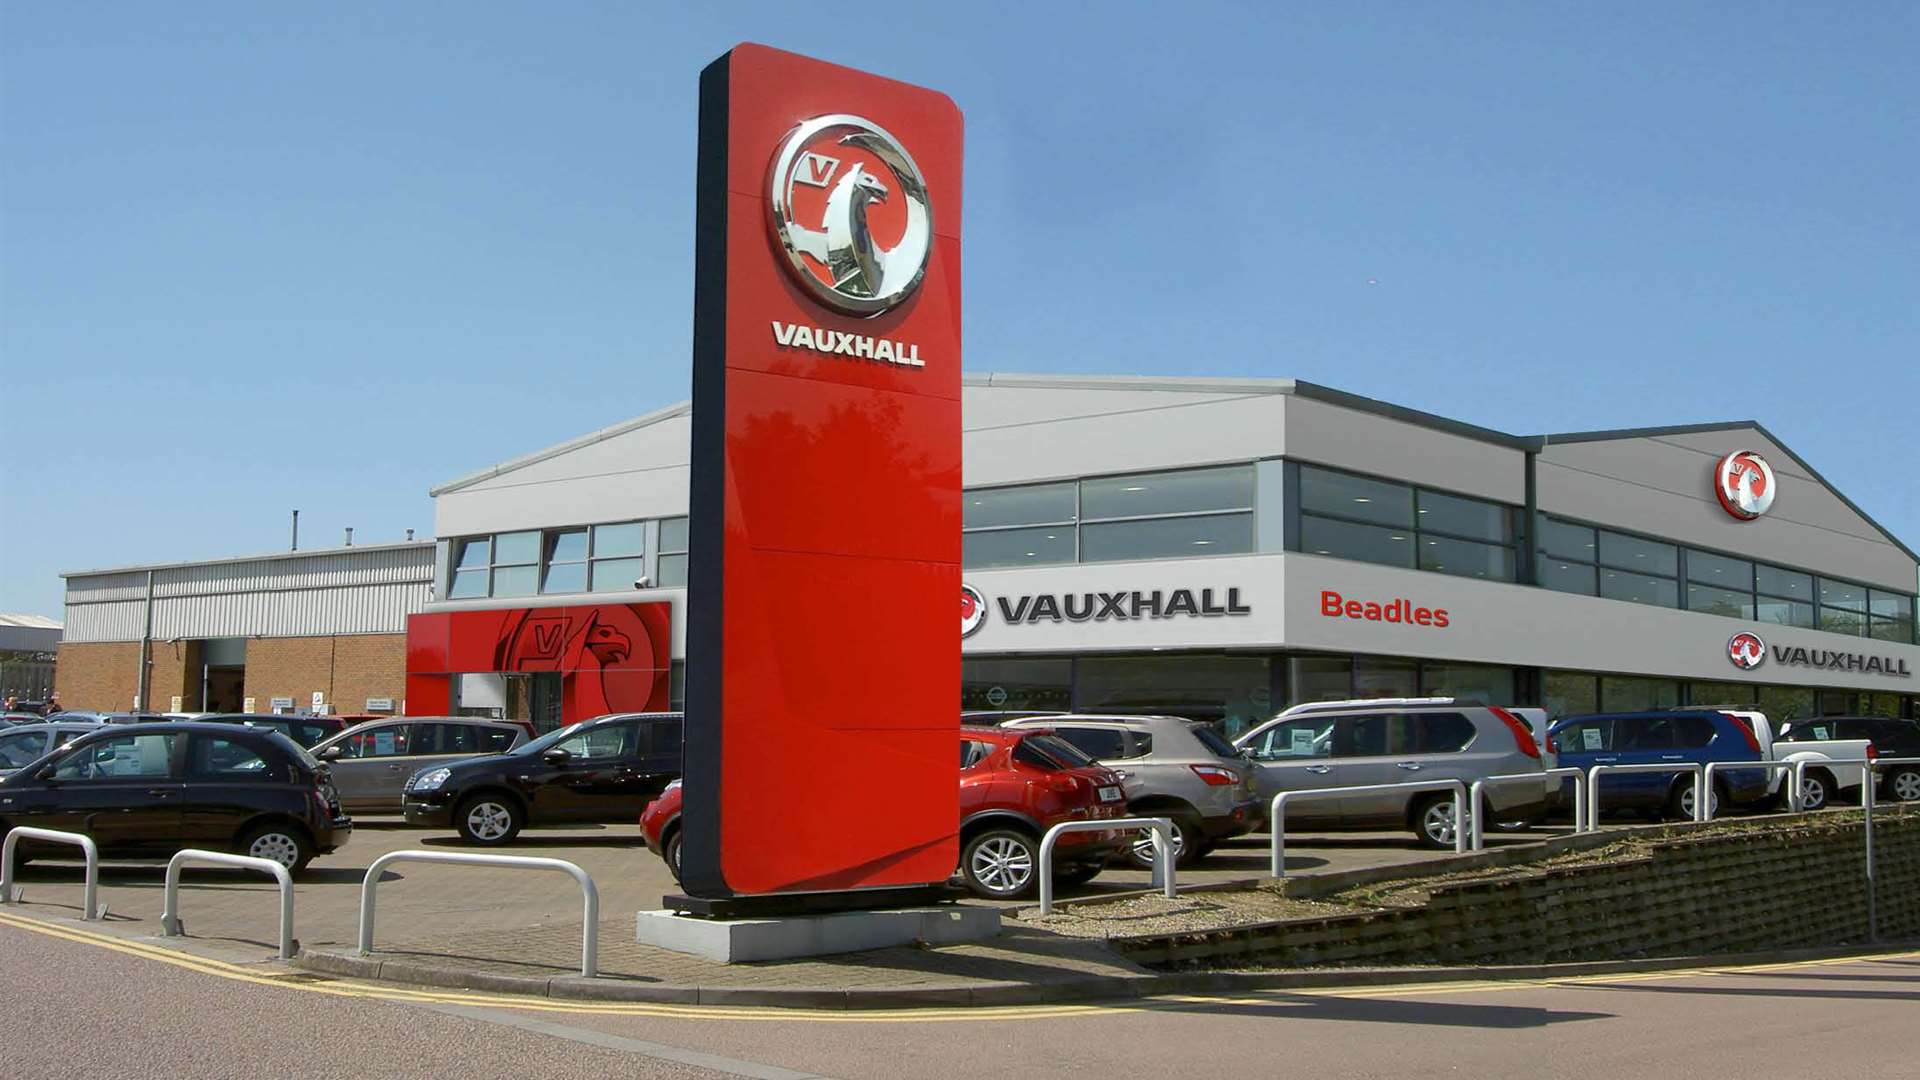 The Vauxhall dealership in Aylesford